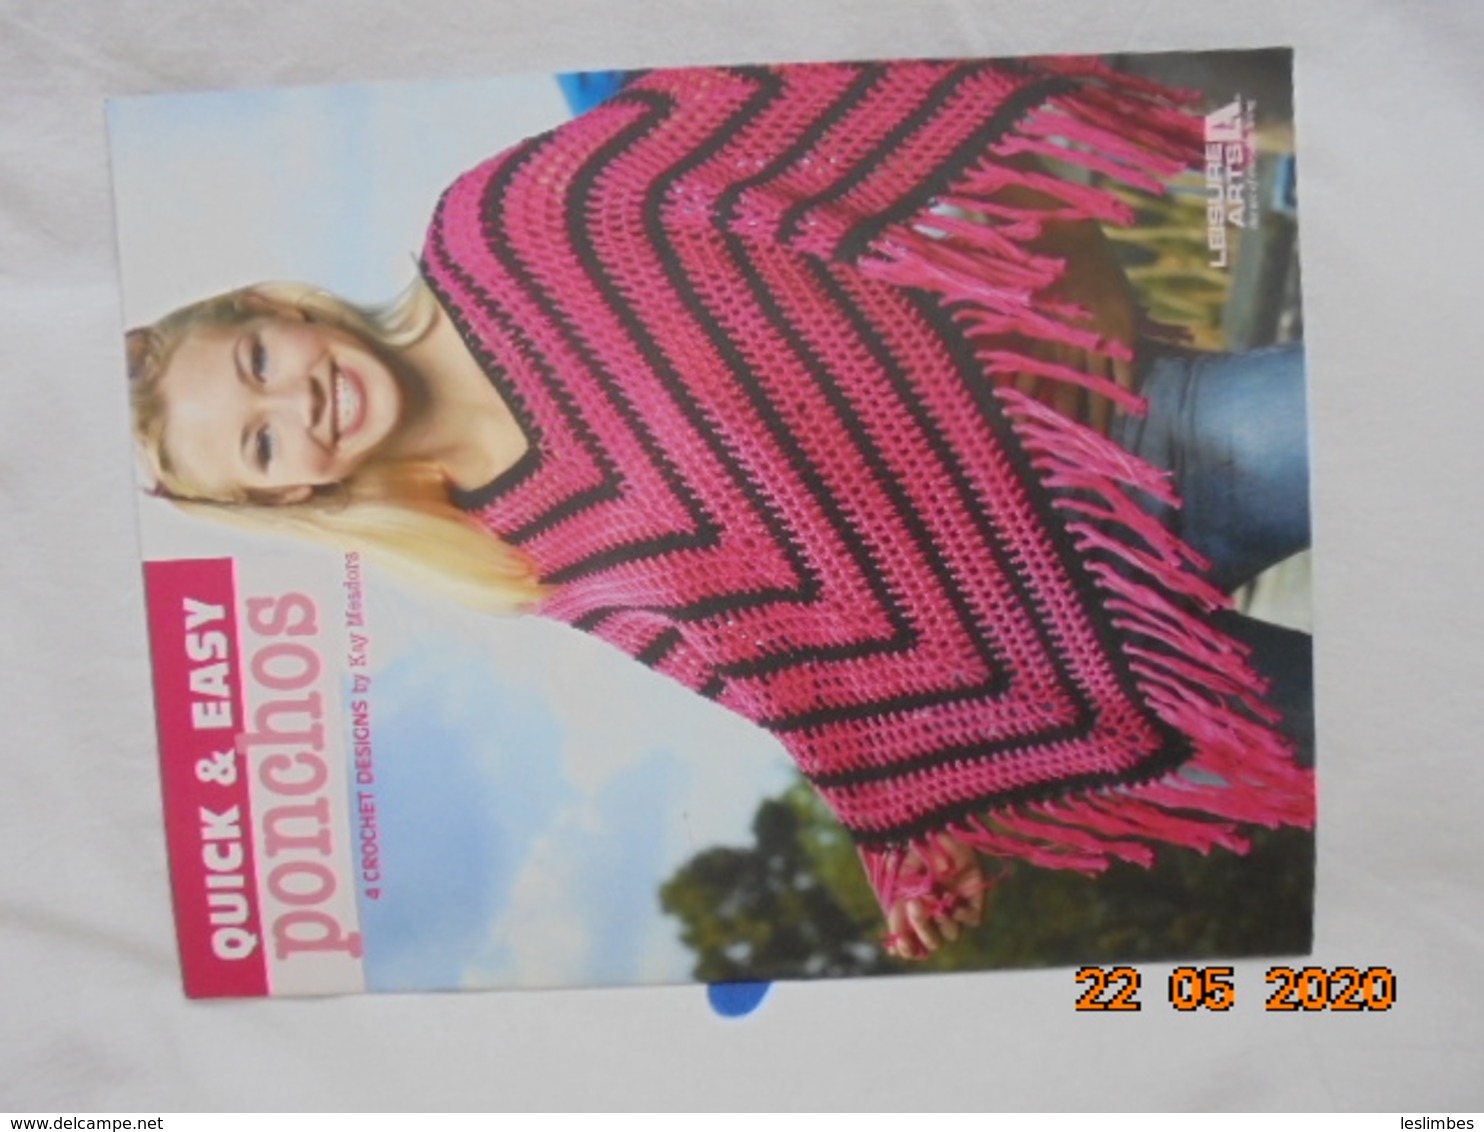 Quick & Easy Ponchos: 4 Crochet Designs. Leisure Arts 3975 By Kay Meadors -- 2004 - Bastelspass